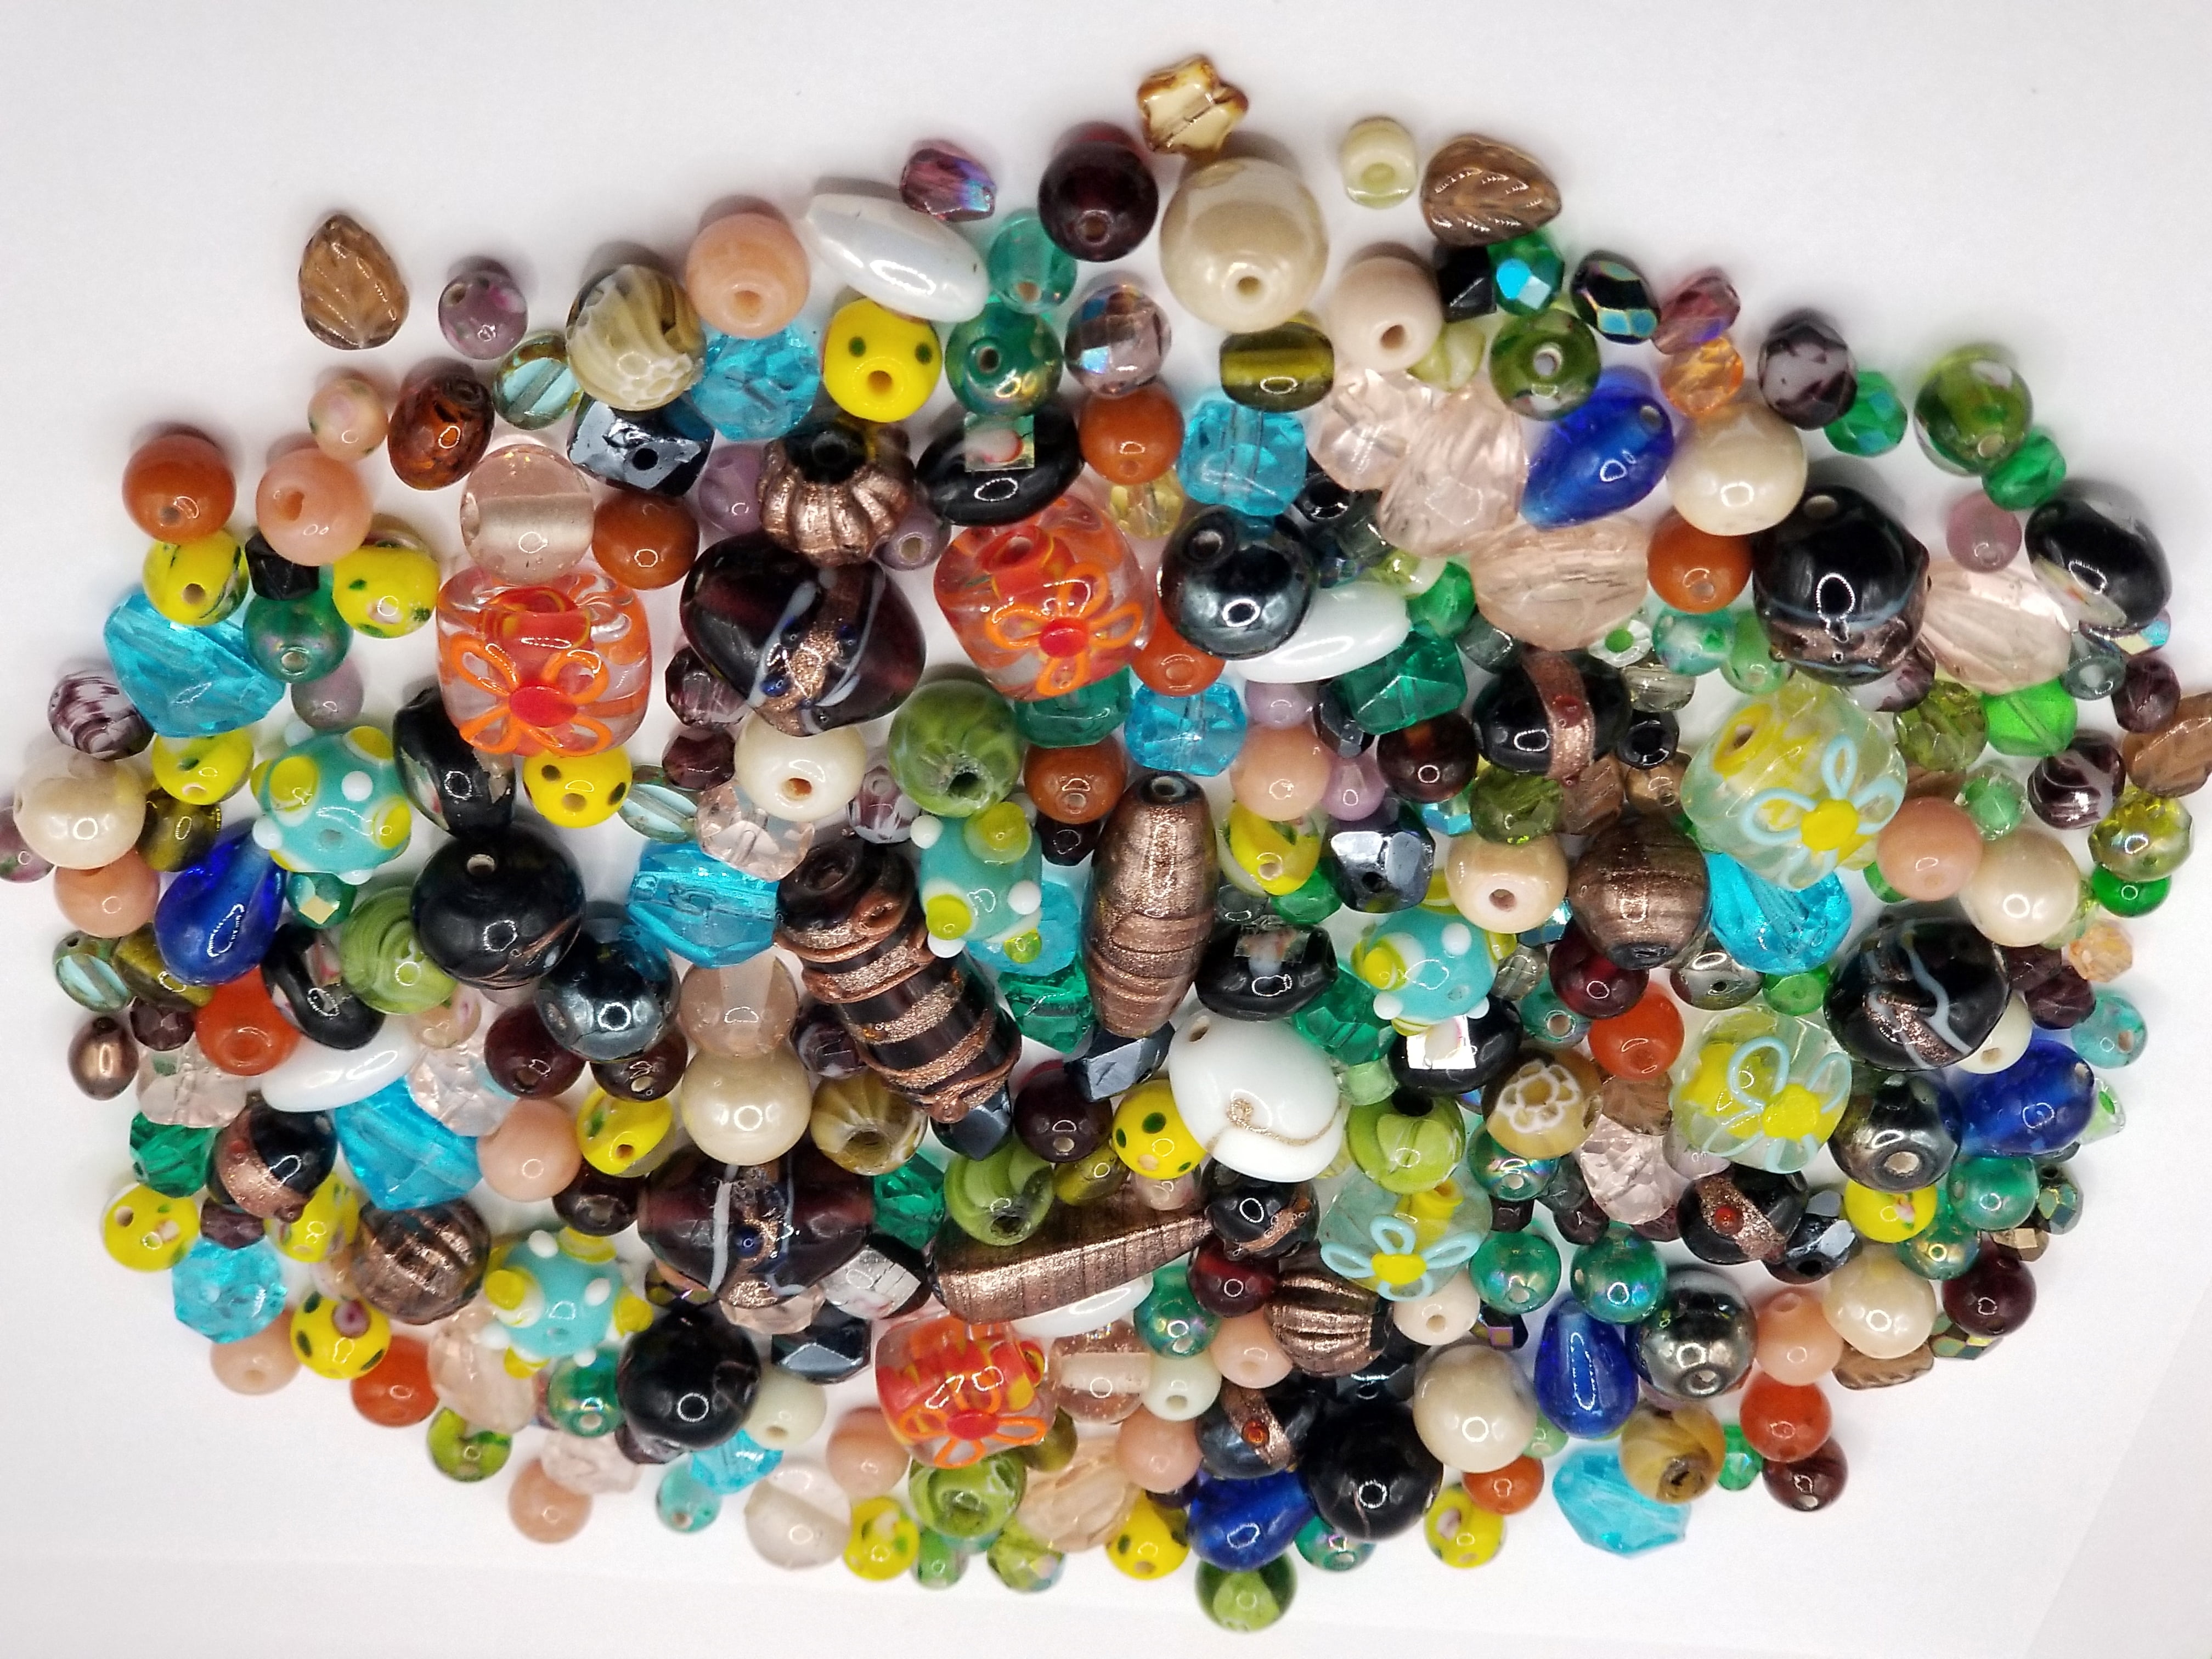 Assorted Glass Beads for Jewelry Making, DIY Lamp Work, Arts and Crafts,  and Decorative Hobby Artistry, Colorful Crystal Assortment Bulk Mix,  4-18mm, One Pound 